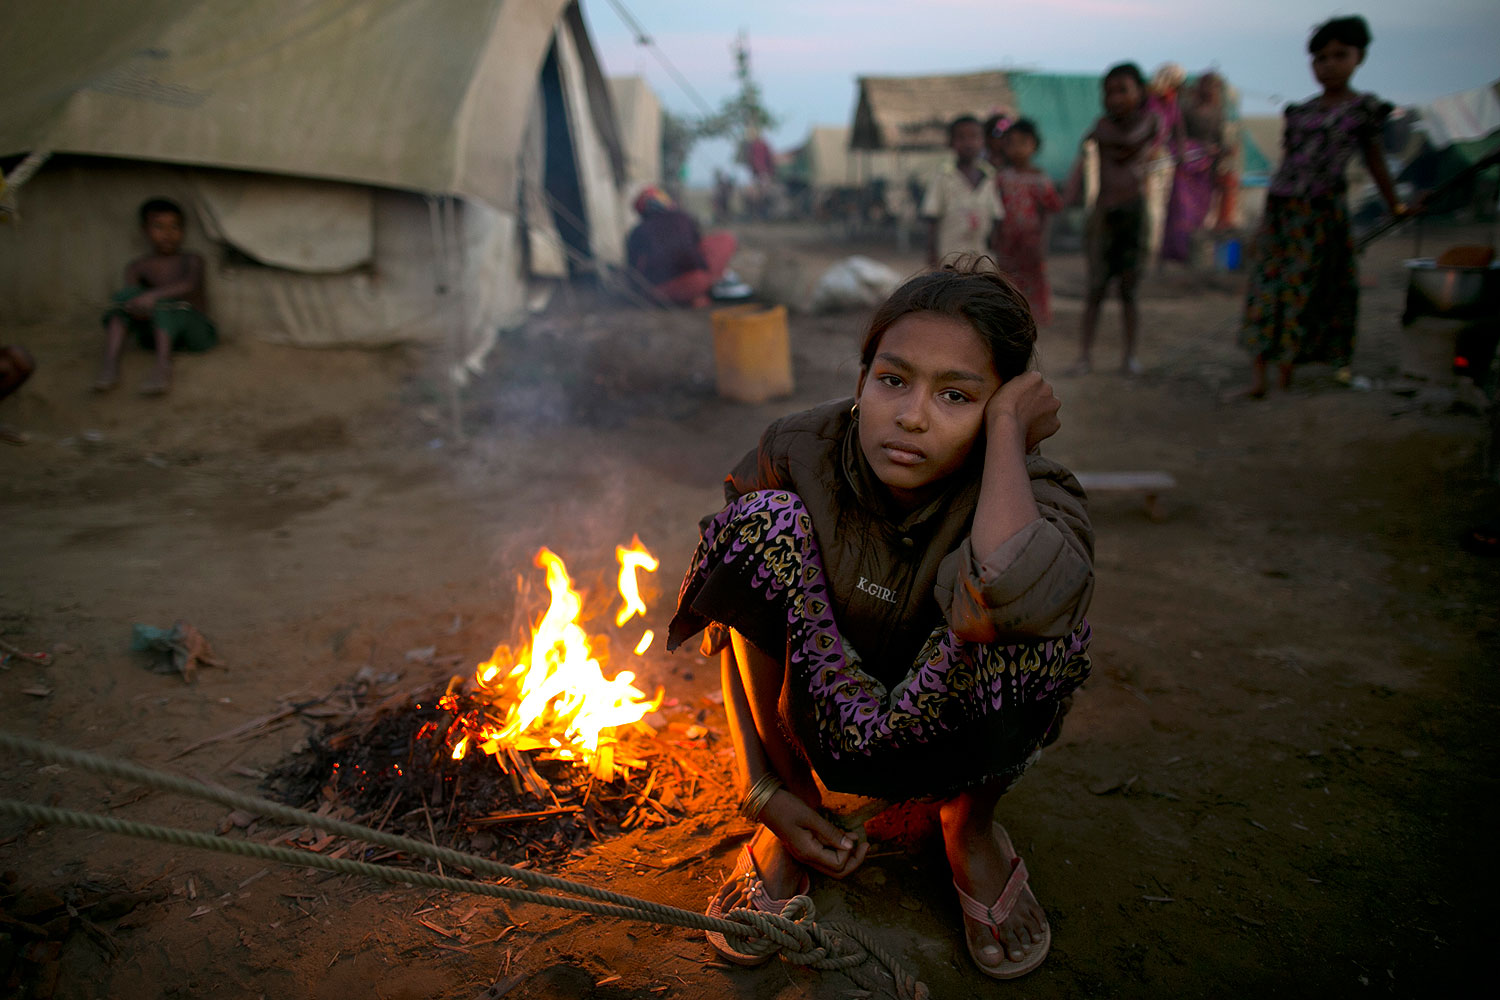 A Rohingya woman sits by a fire at a crowded internally displaced persons (IDP) camp Nov. 23, 2012 on the outskirts of Sittwe, Burma (Paula Bronstein / Getty Images)